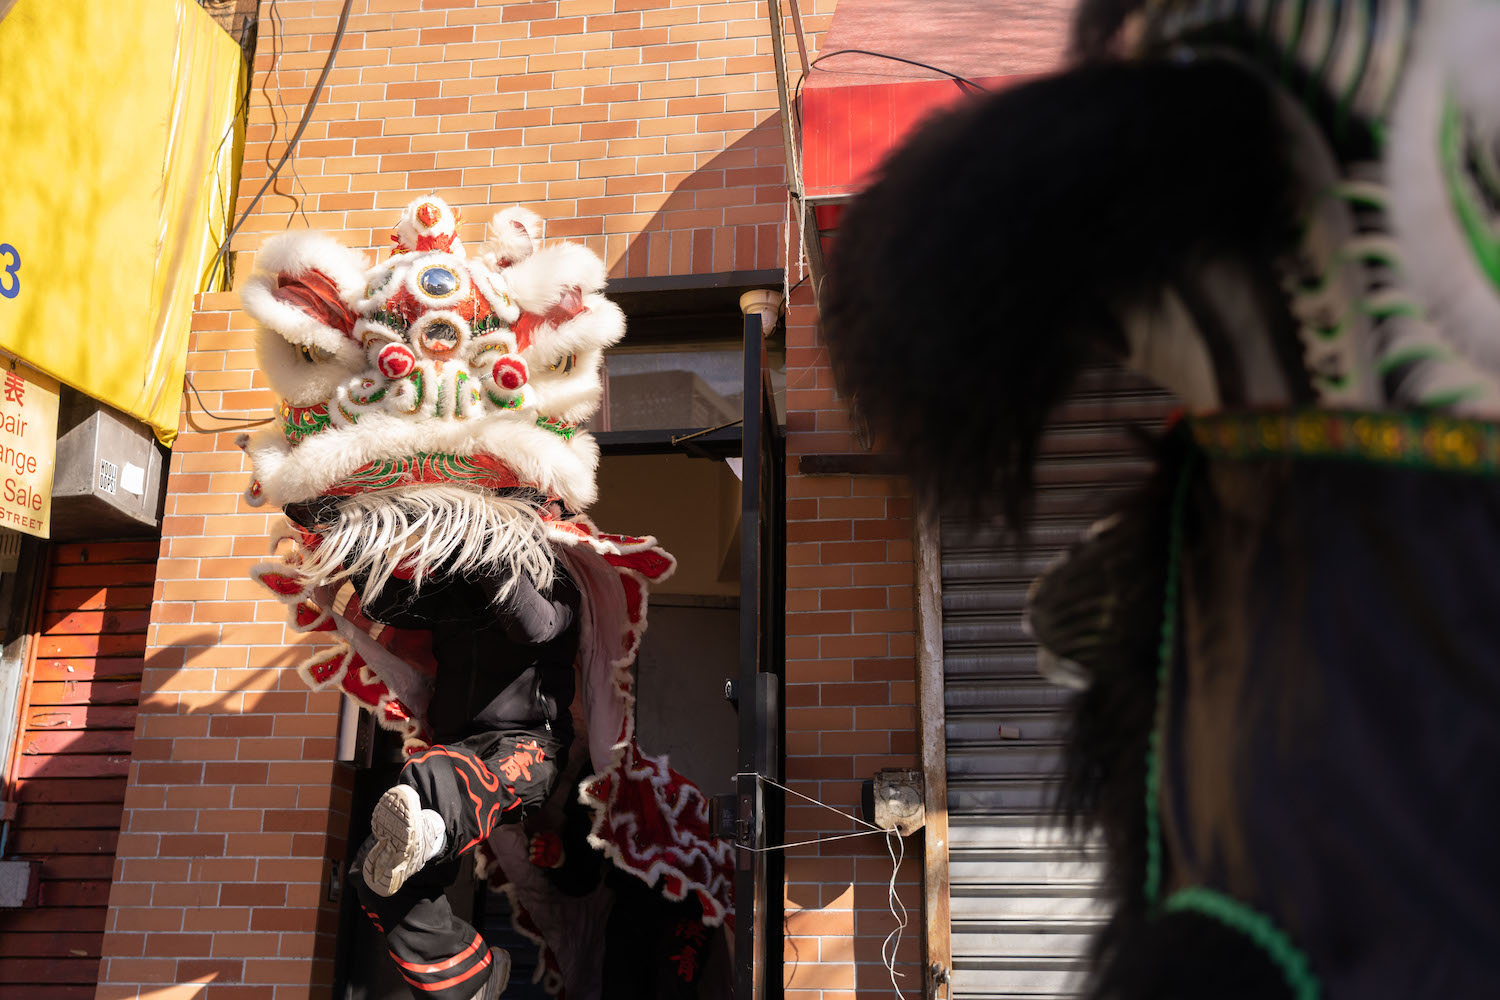 A lion dance performer marched out of a building with red bricks.